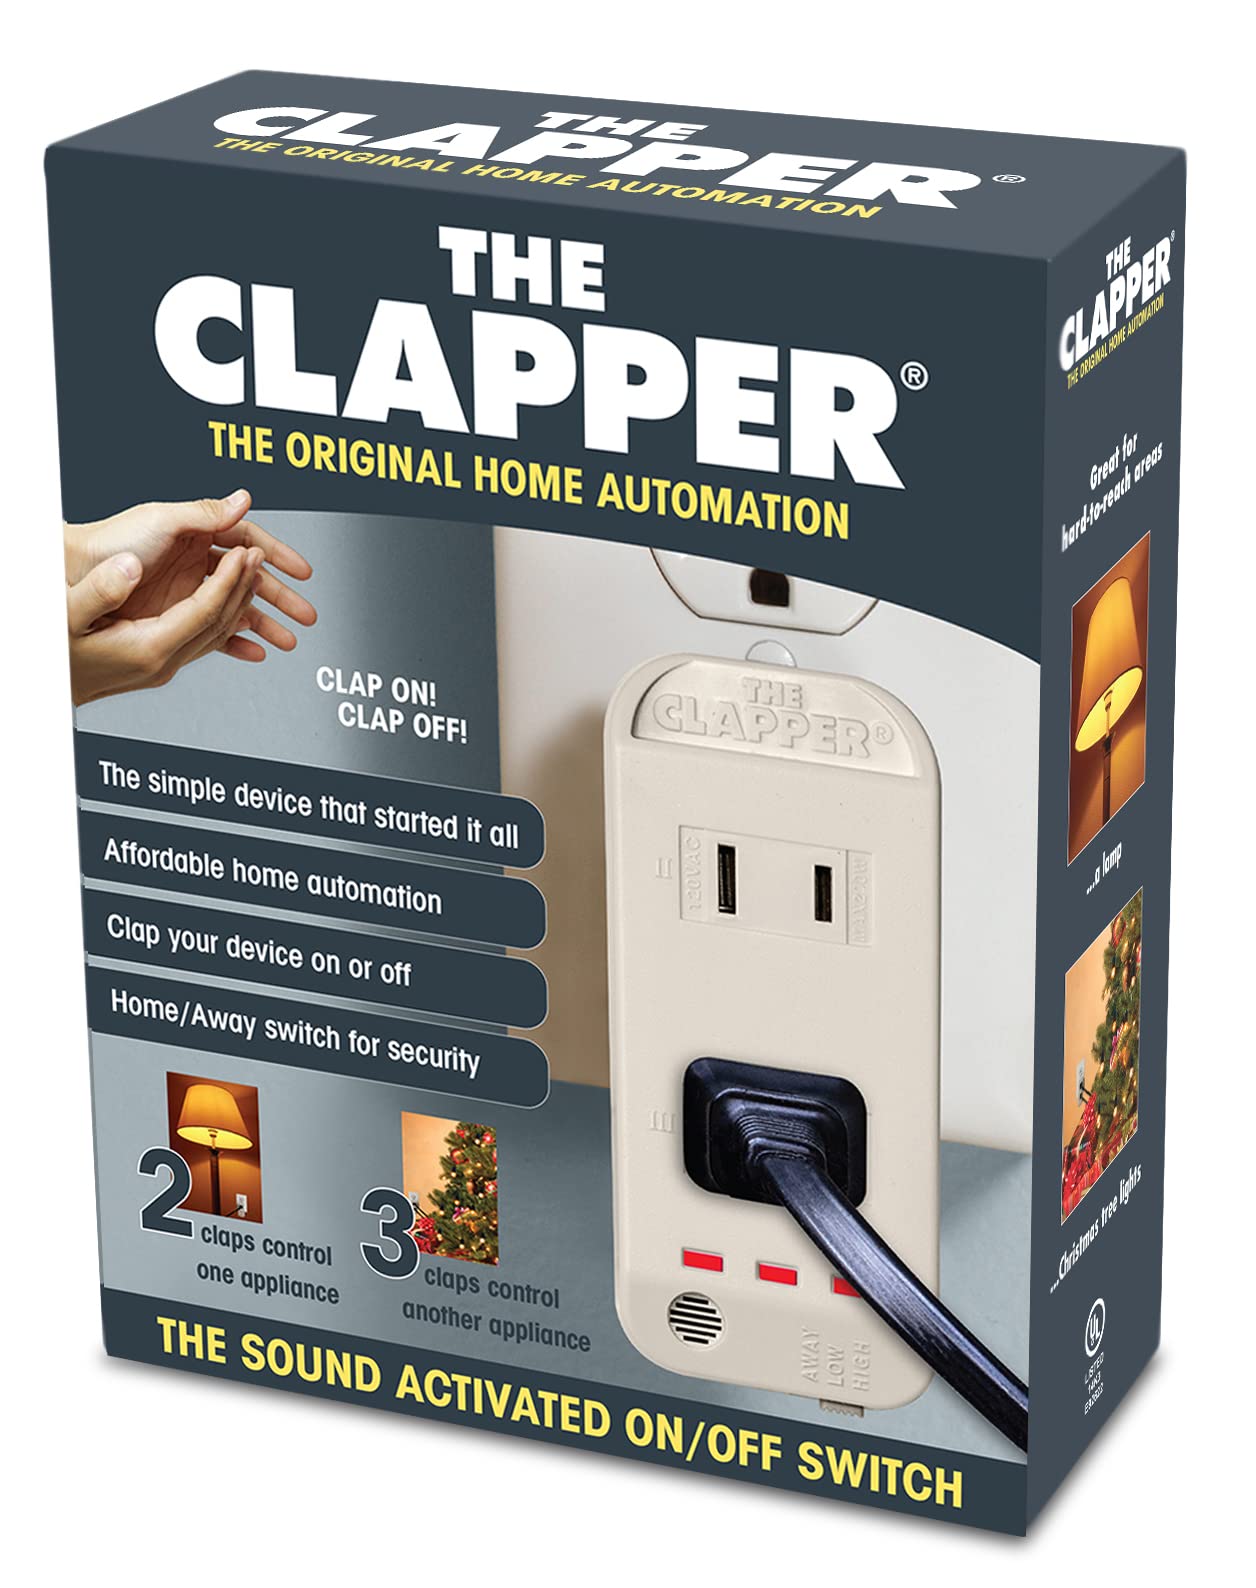 The Clapper, The Original Home Automation Sound Activated Device, On/Off Light Switch, Clap Detection - Kitchen Bedroom TV Appliances - 120v Wall Plug Smart Home Technology, As Seen On TV Home Gift